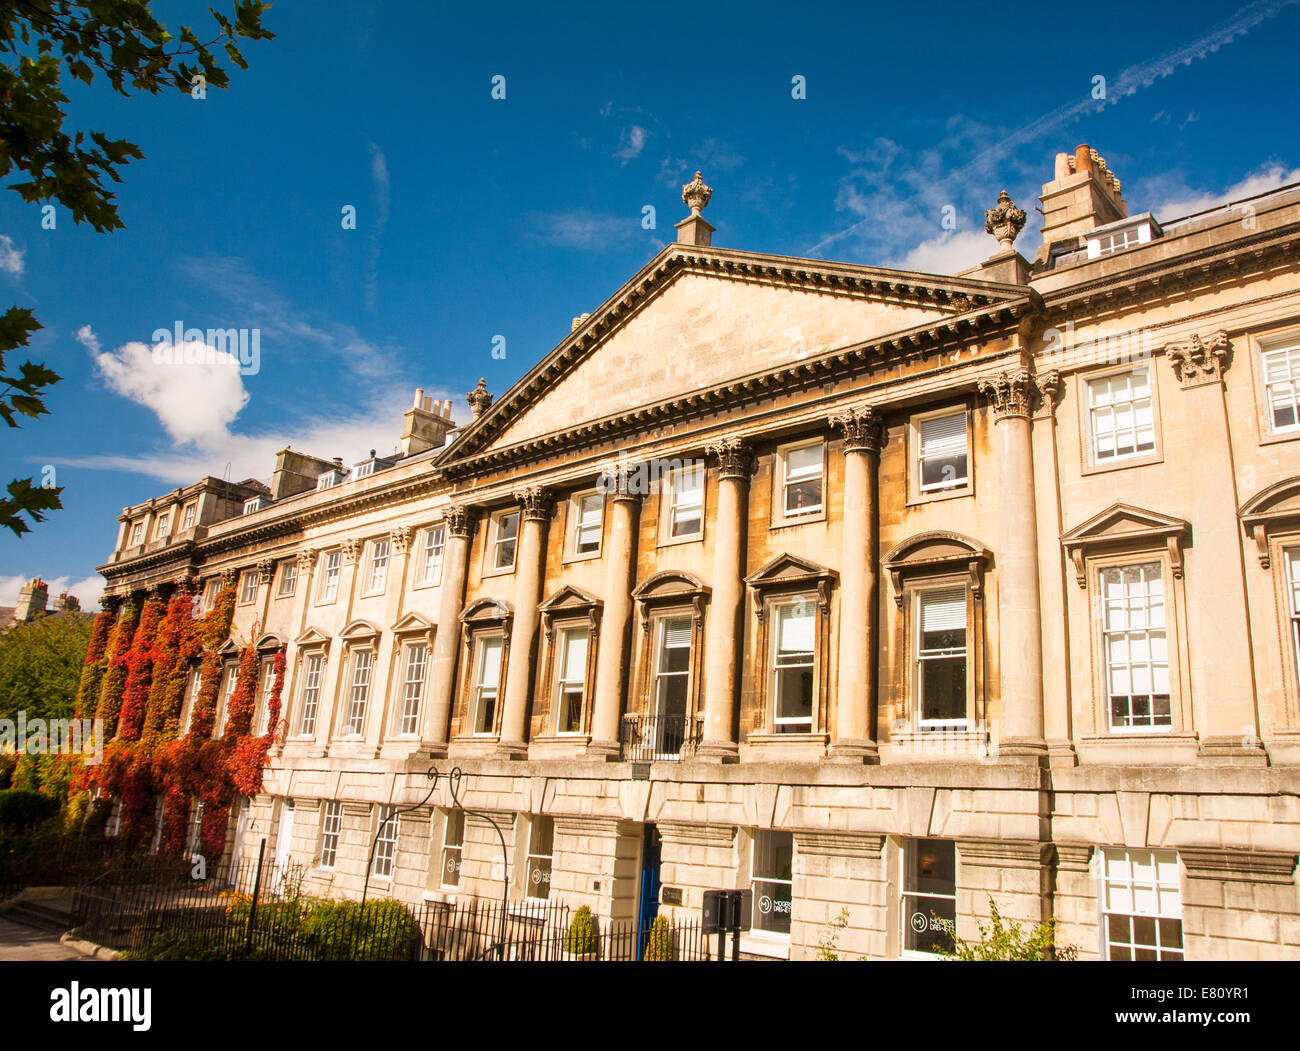 The Building in Bath uk Stock Photo